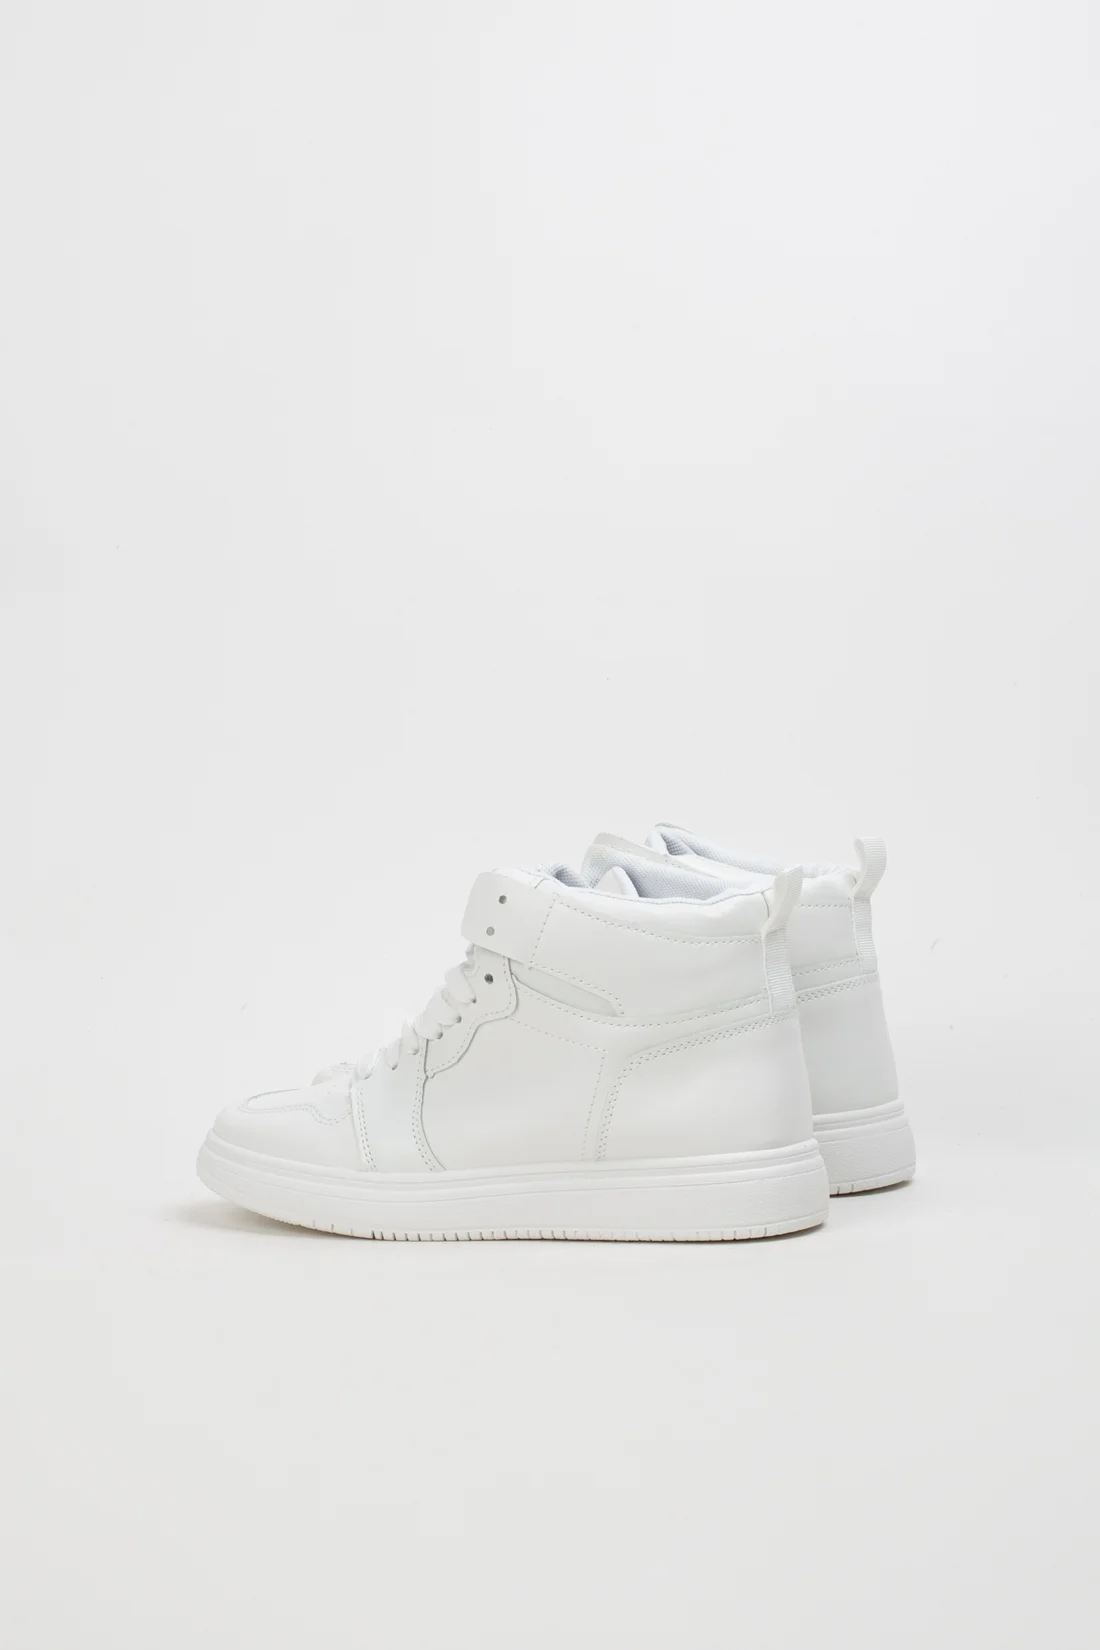 SNEAKERS CASUAL DONER - BLANCO